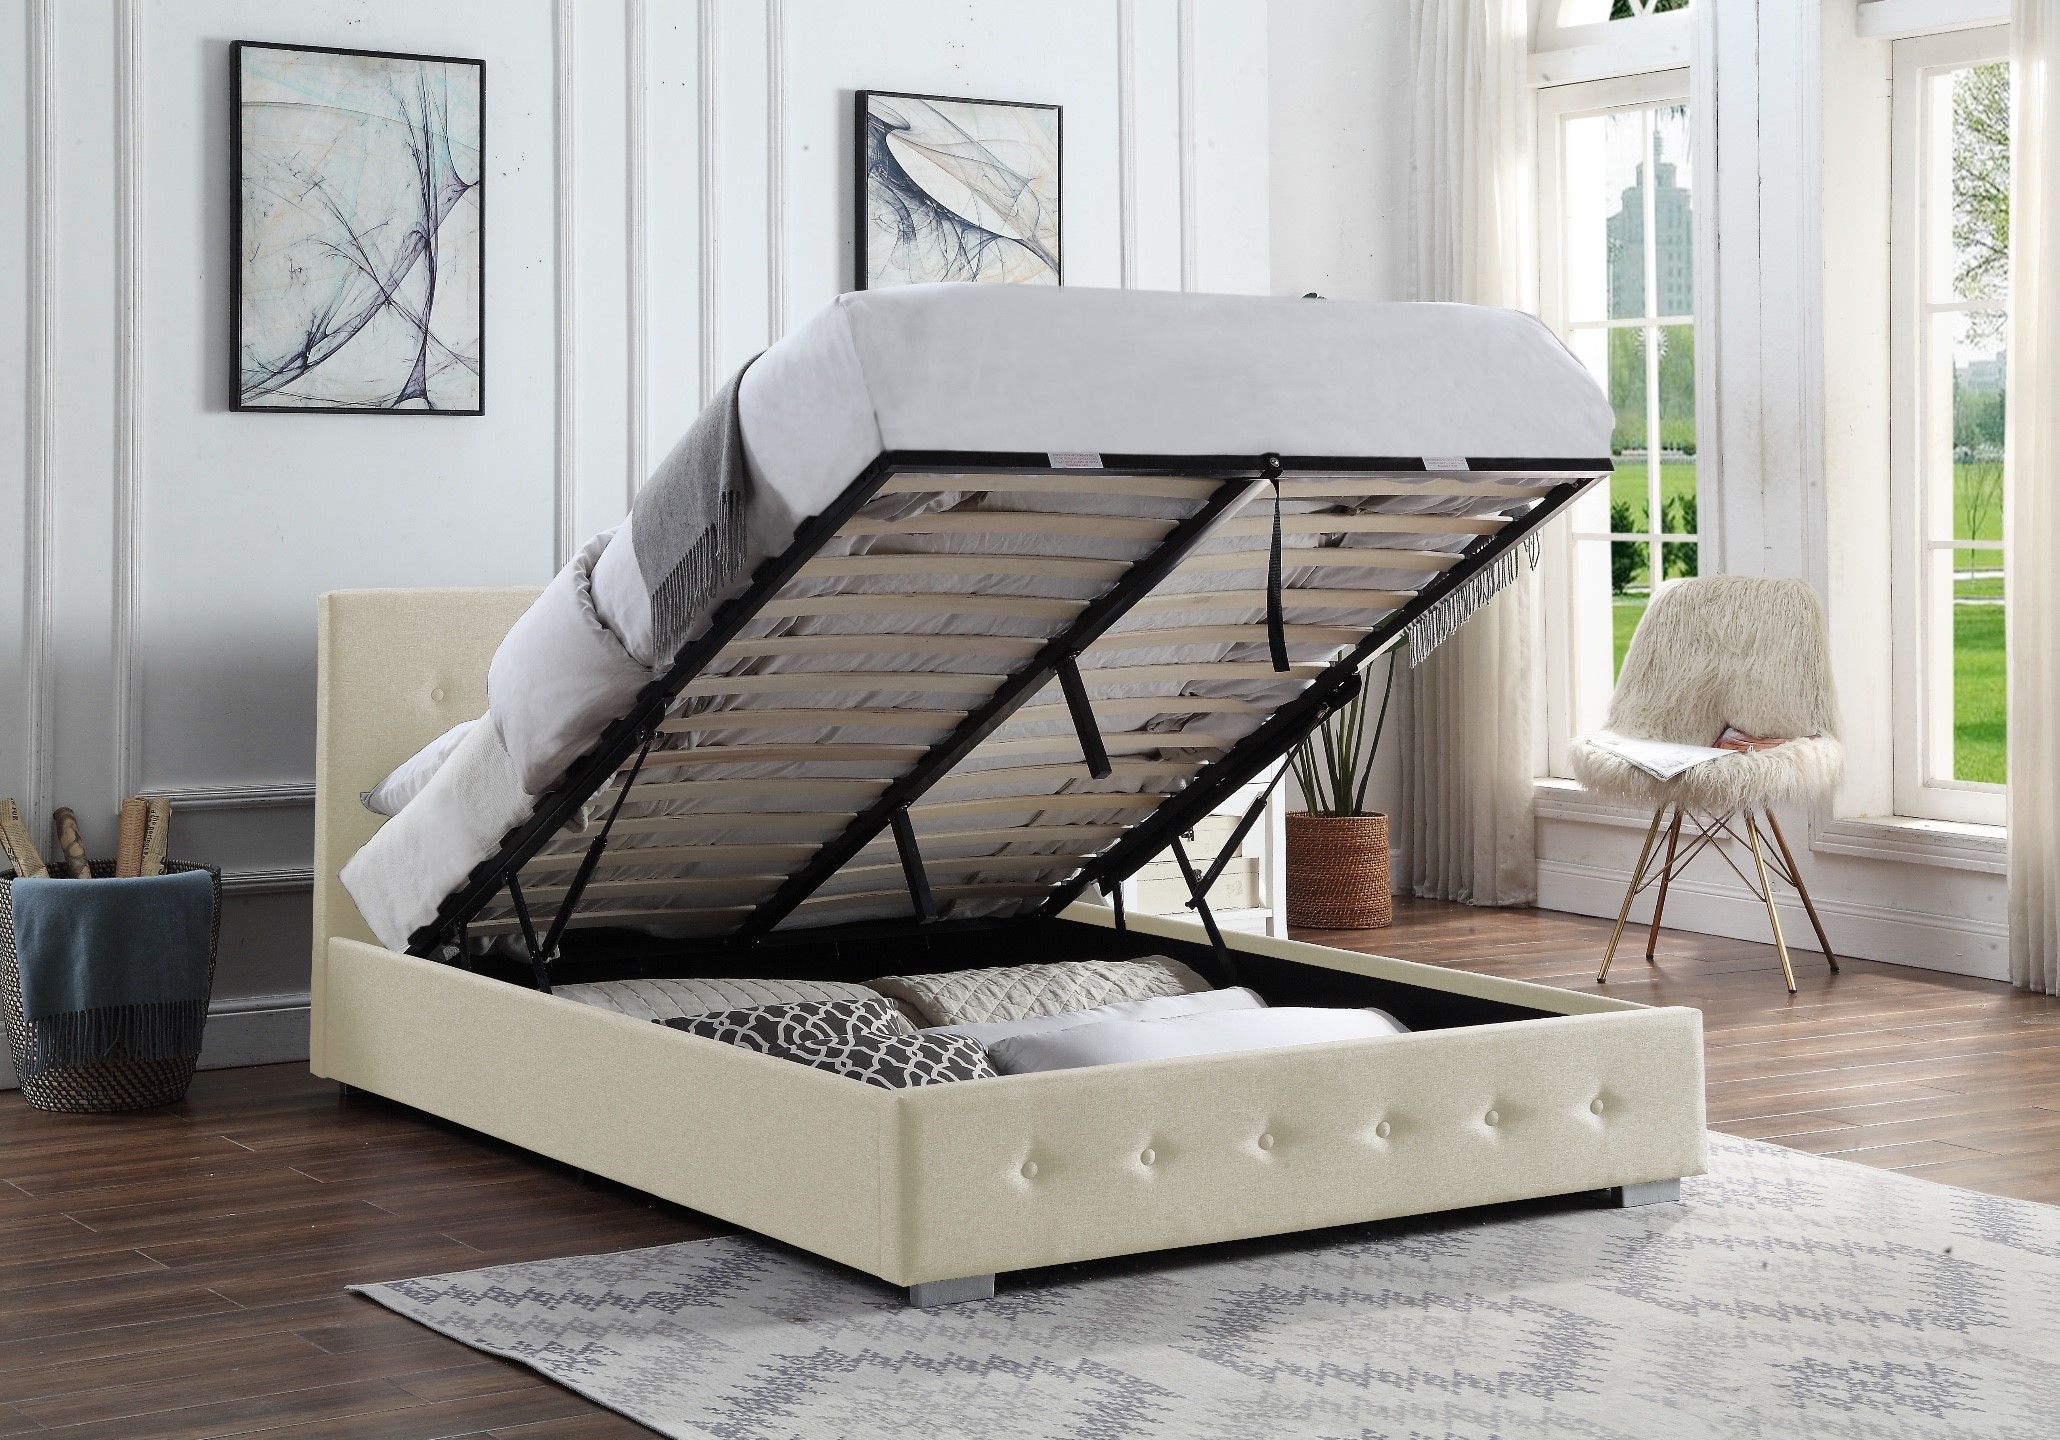 mattress firm bed frame full to king size